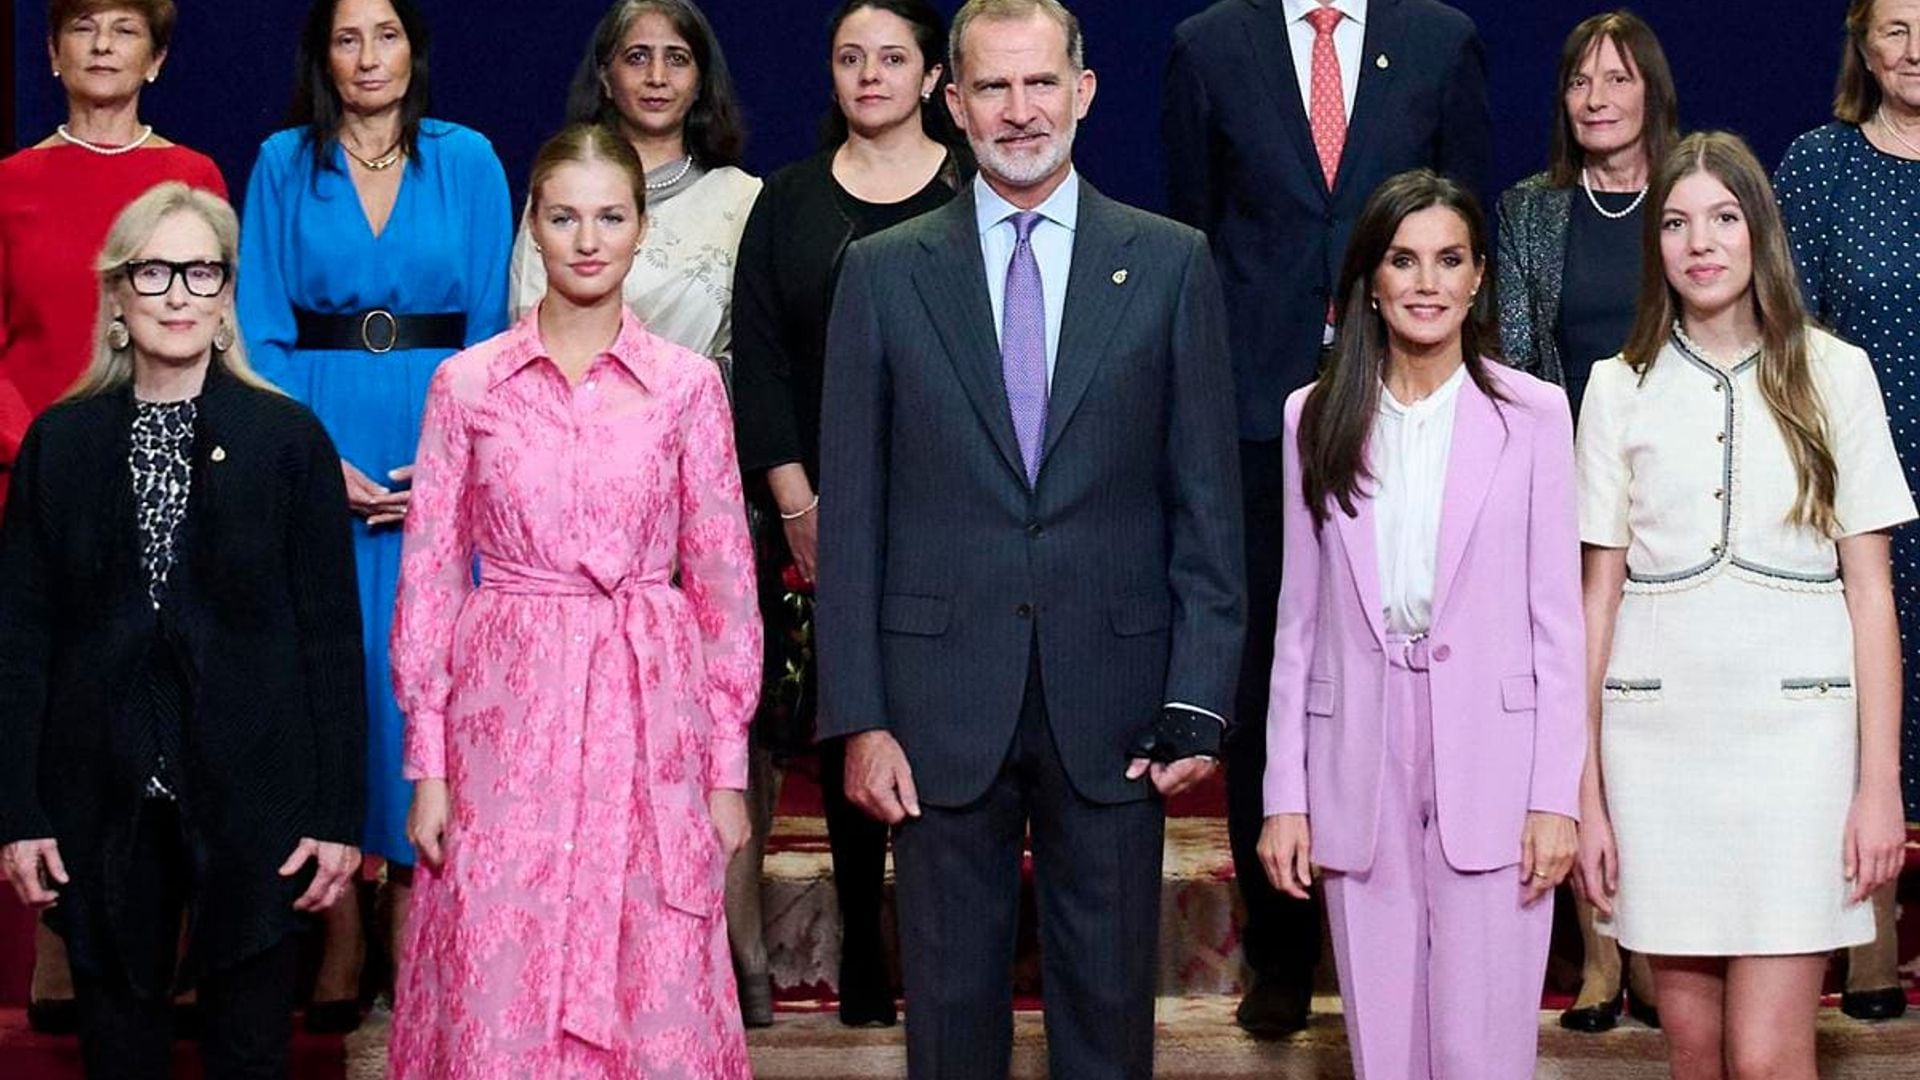 Watch the moment Queen Letizia and her daughters meet Meryl Streep